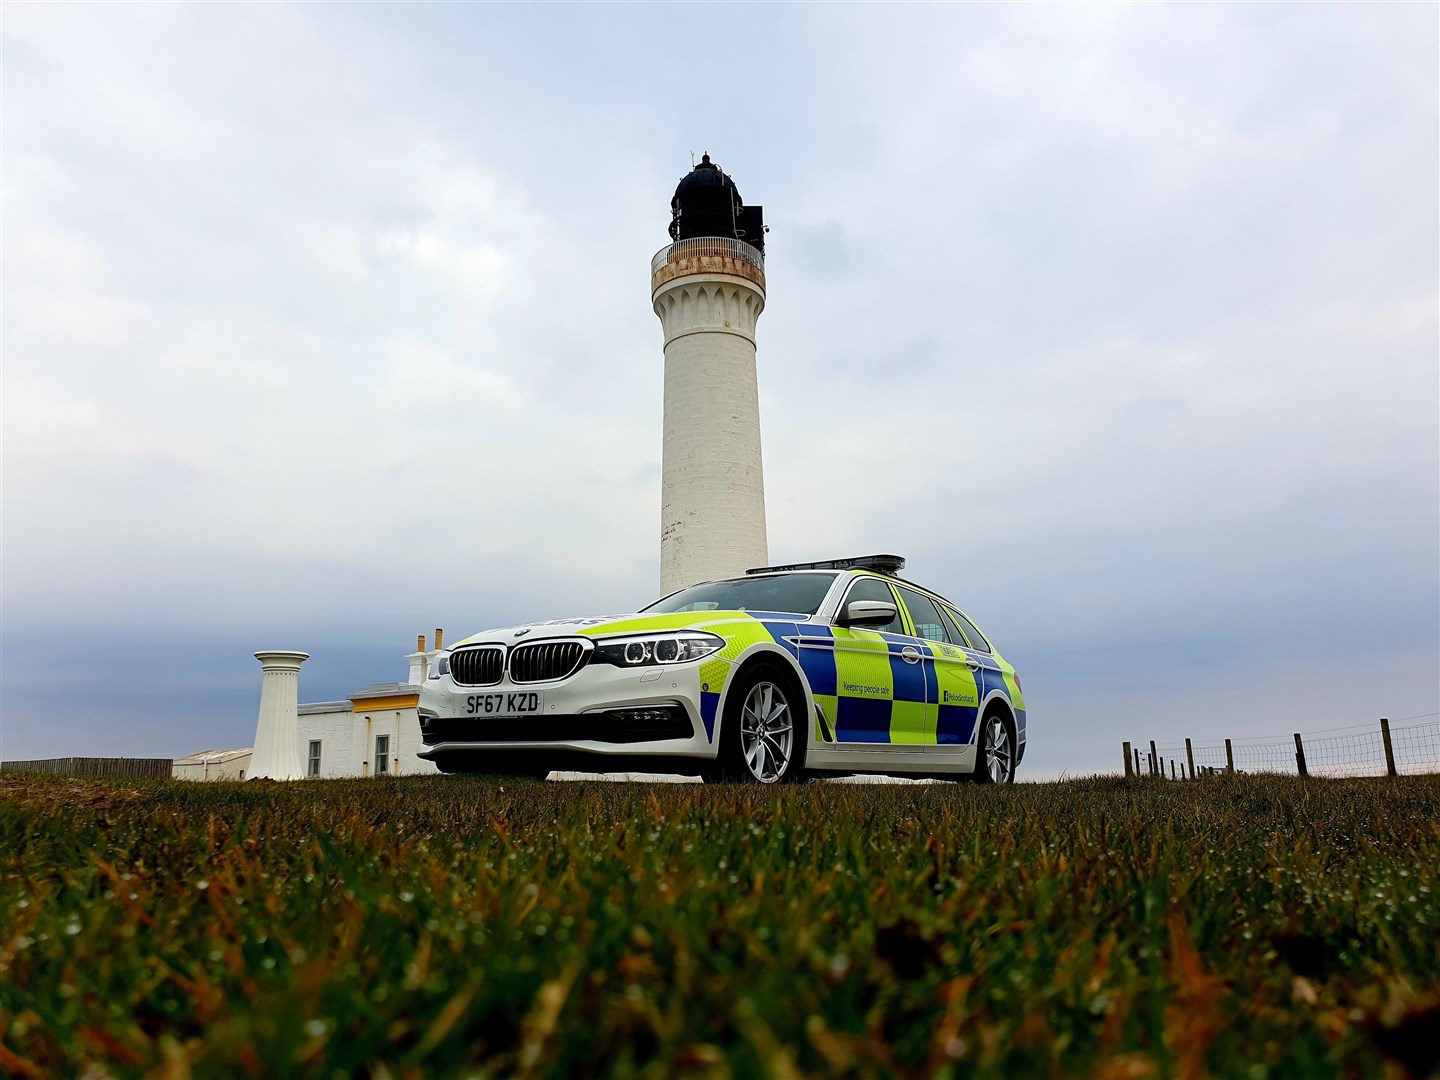 Police at Covesea Lighthouse, Lossiemouth, as they enforce lockdown rules.